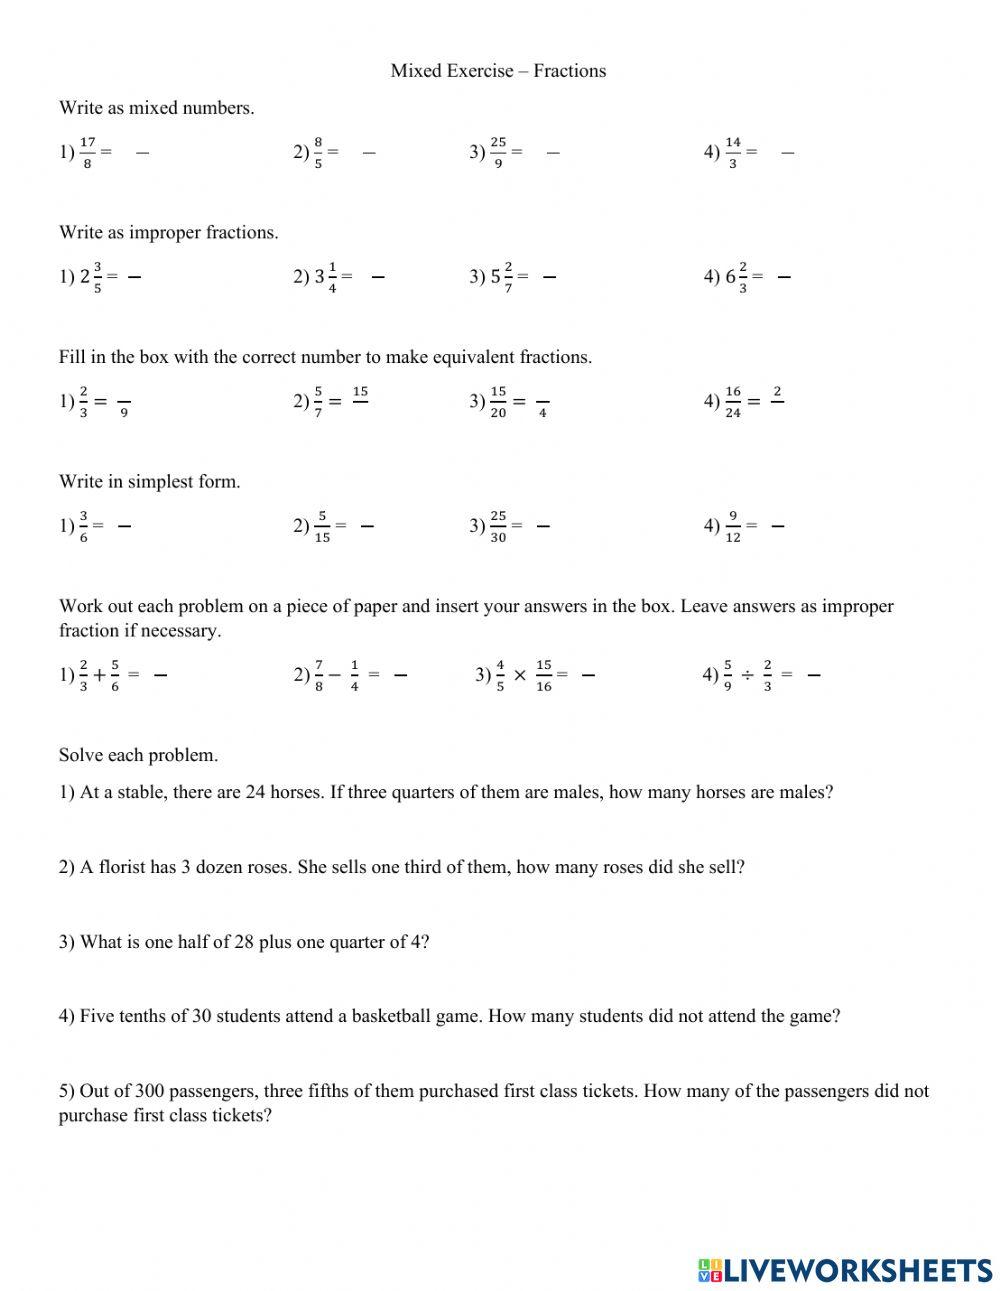 Mixed Exercise Fractions